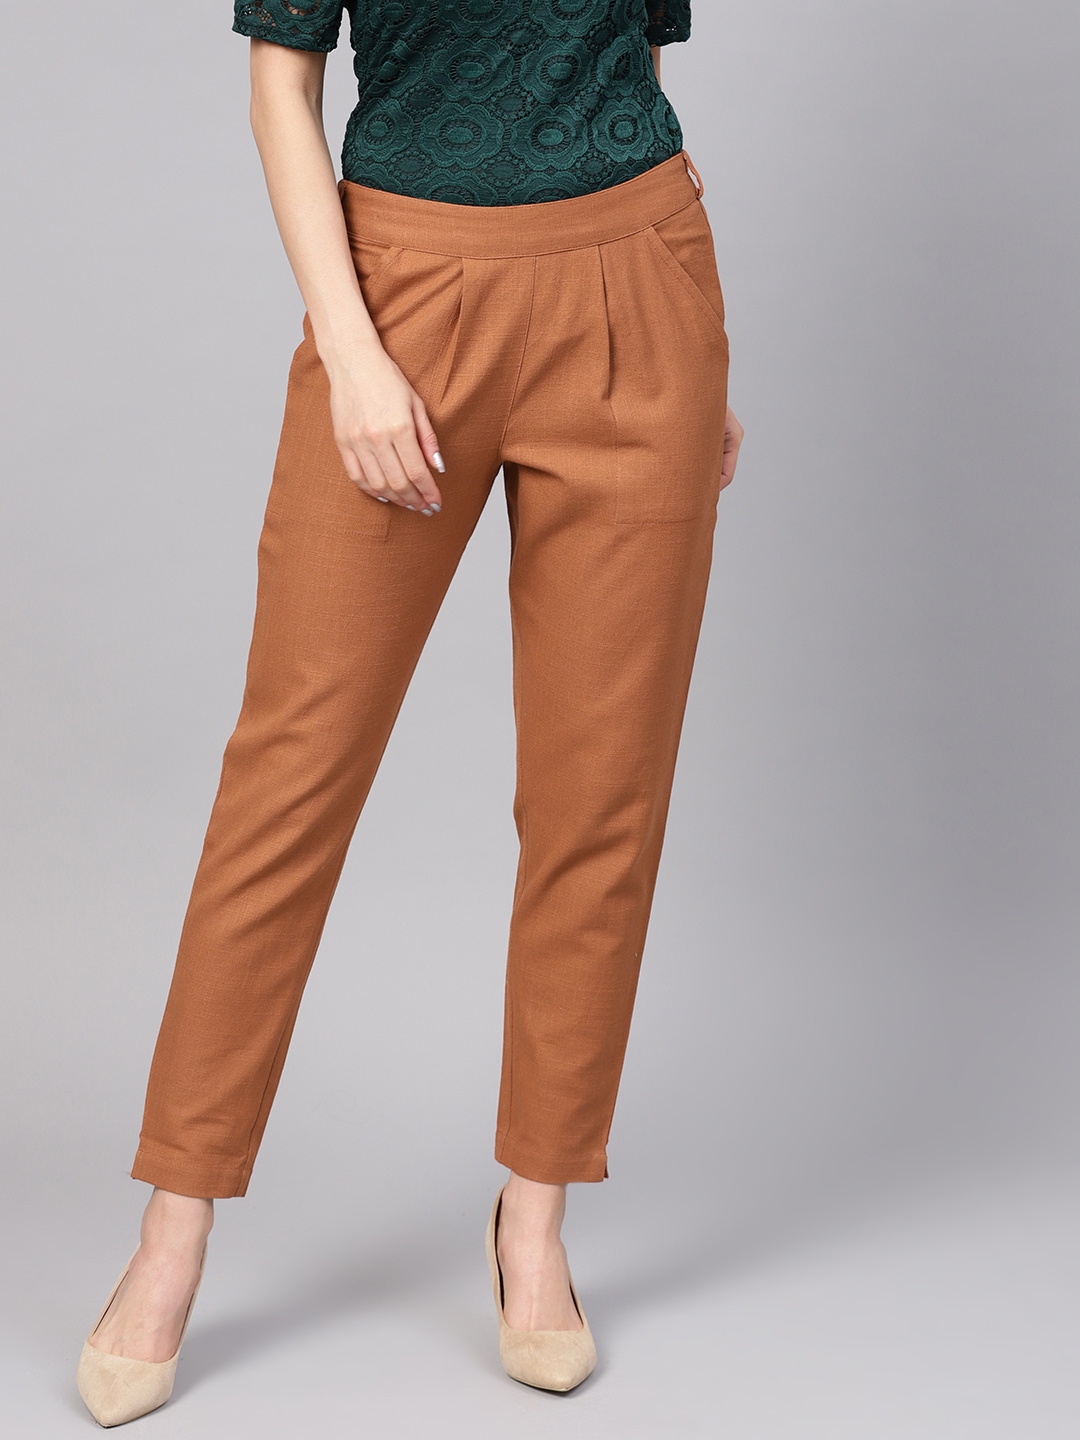 Buy Brown Trousers  Pants for Men by Beverly Hills Polo Club Online   Ajiocom